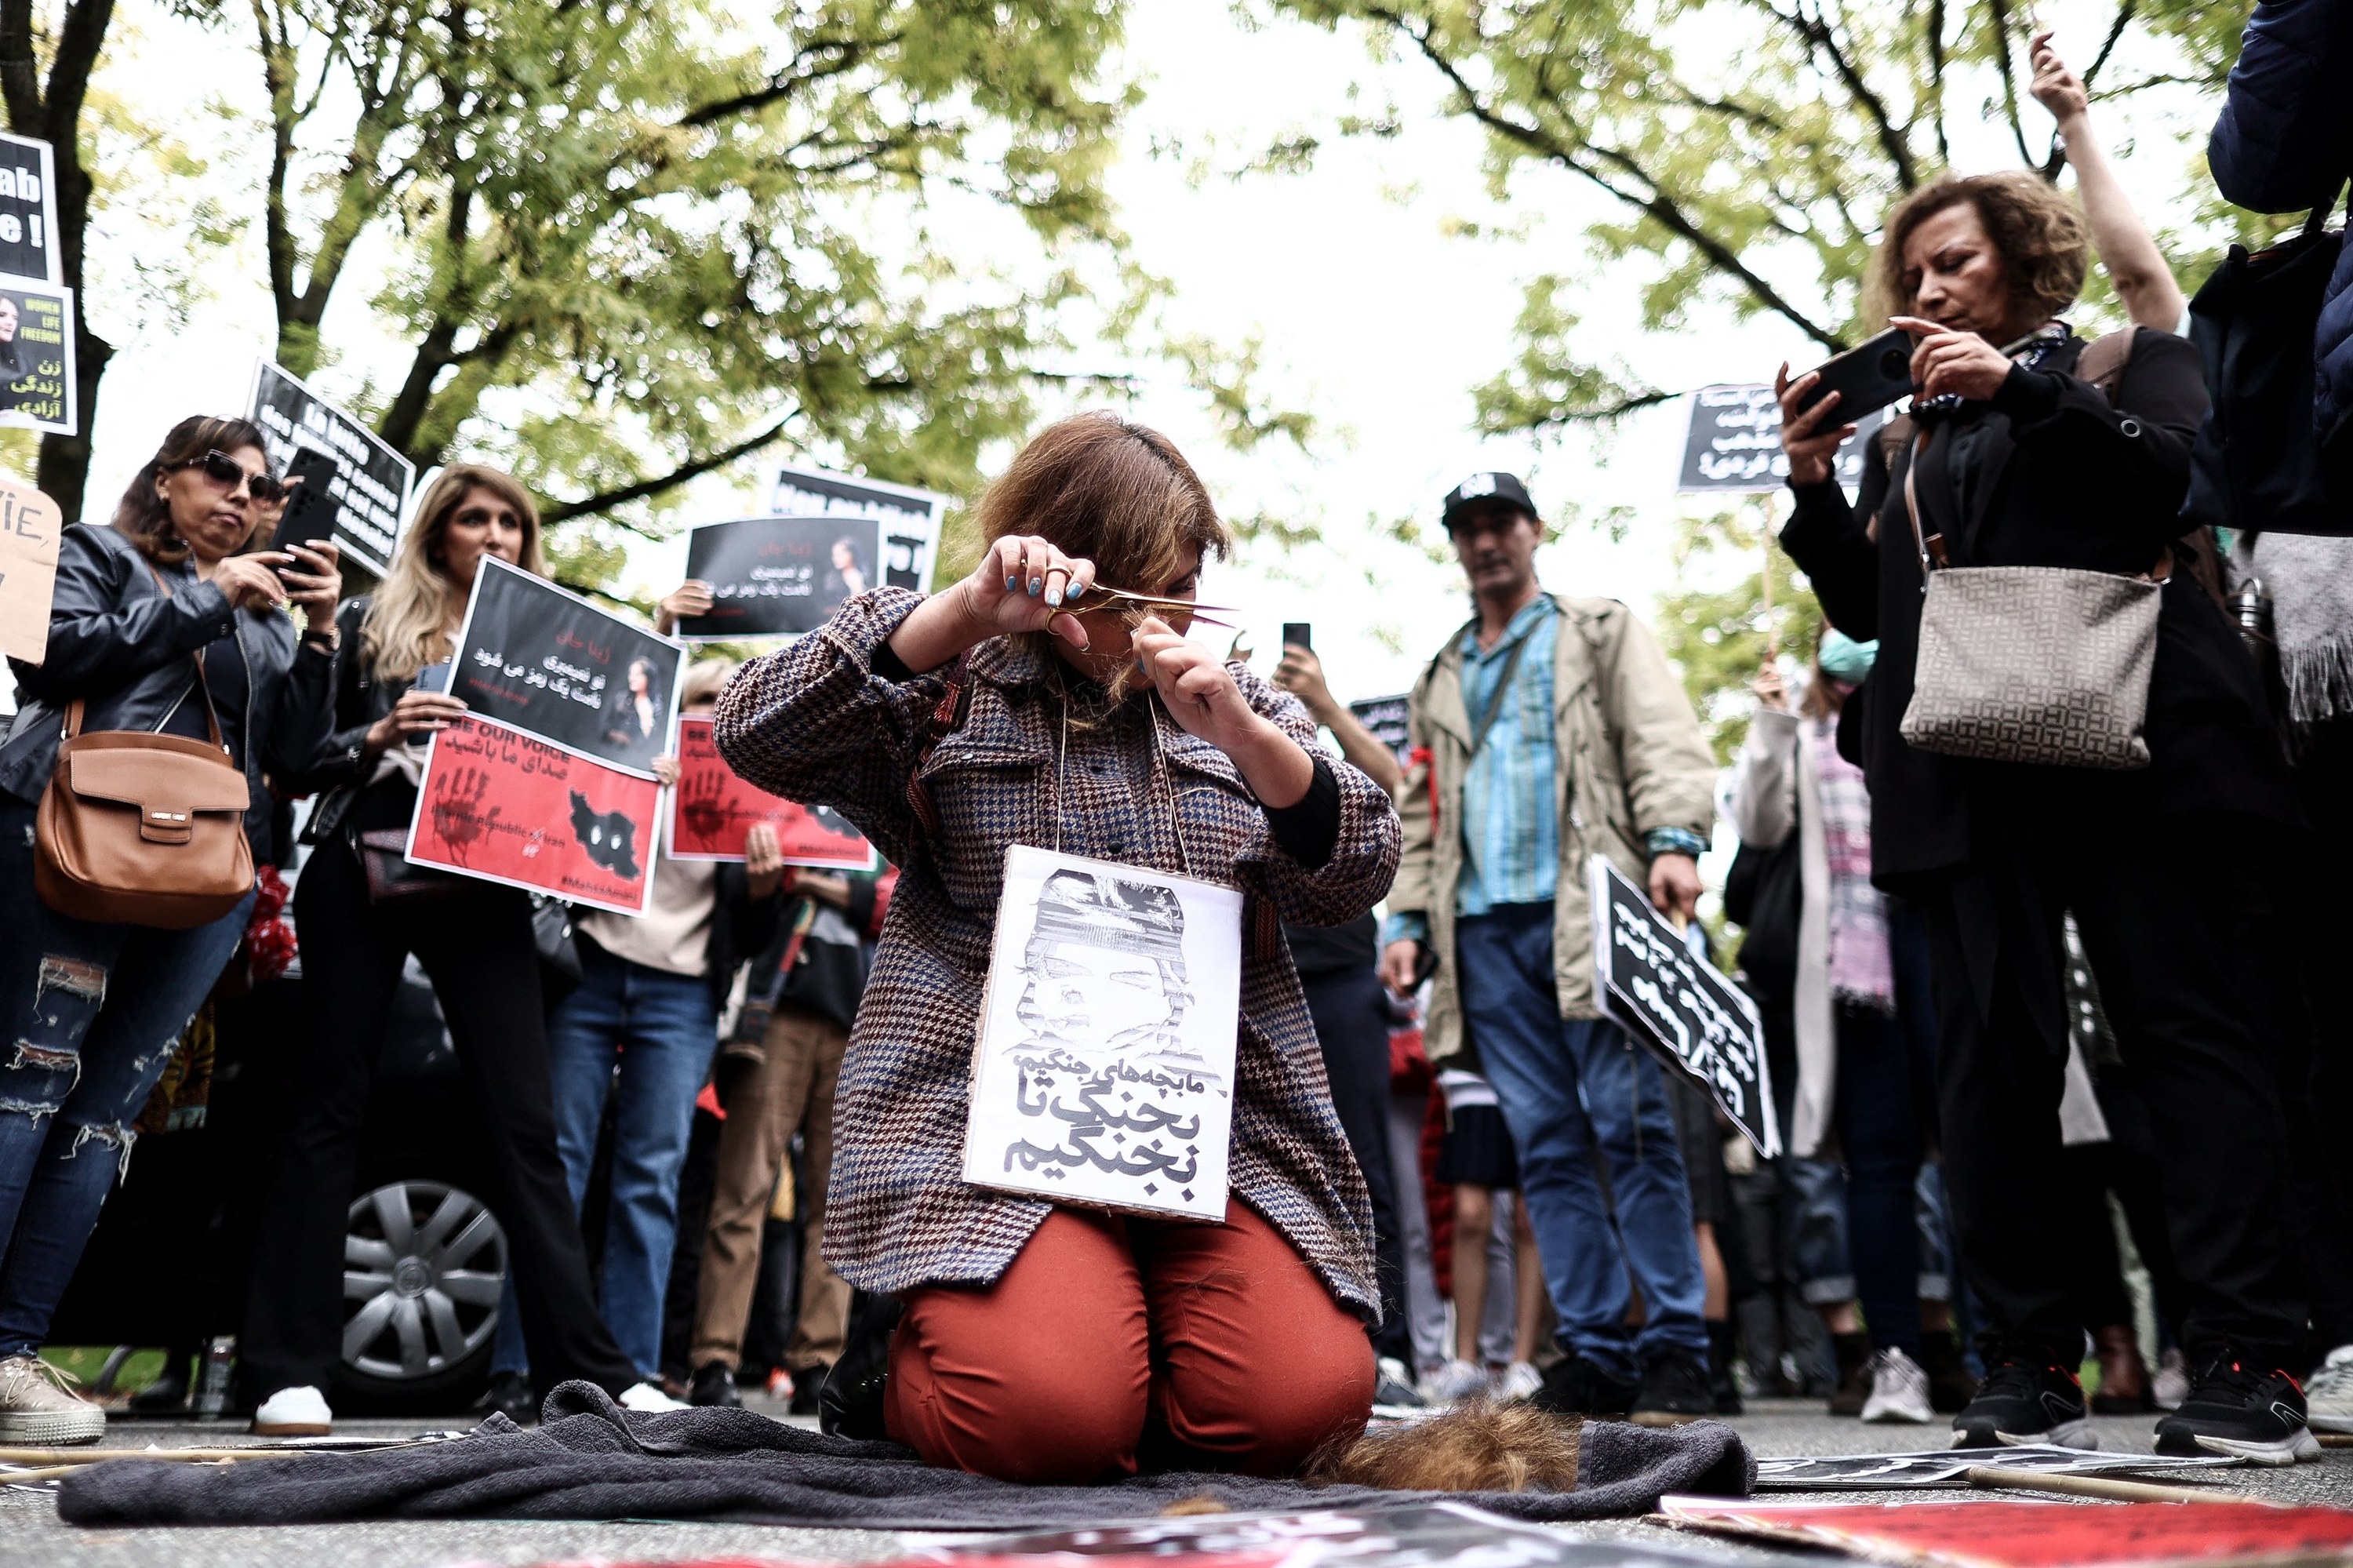 A woman kneels on the ground and cuts her hair in front of a crowd of protesters